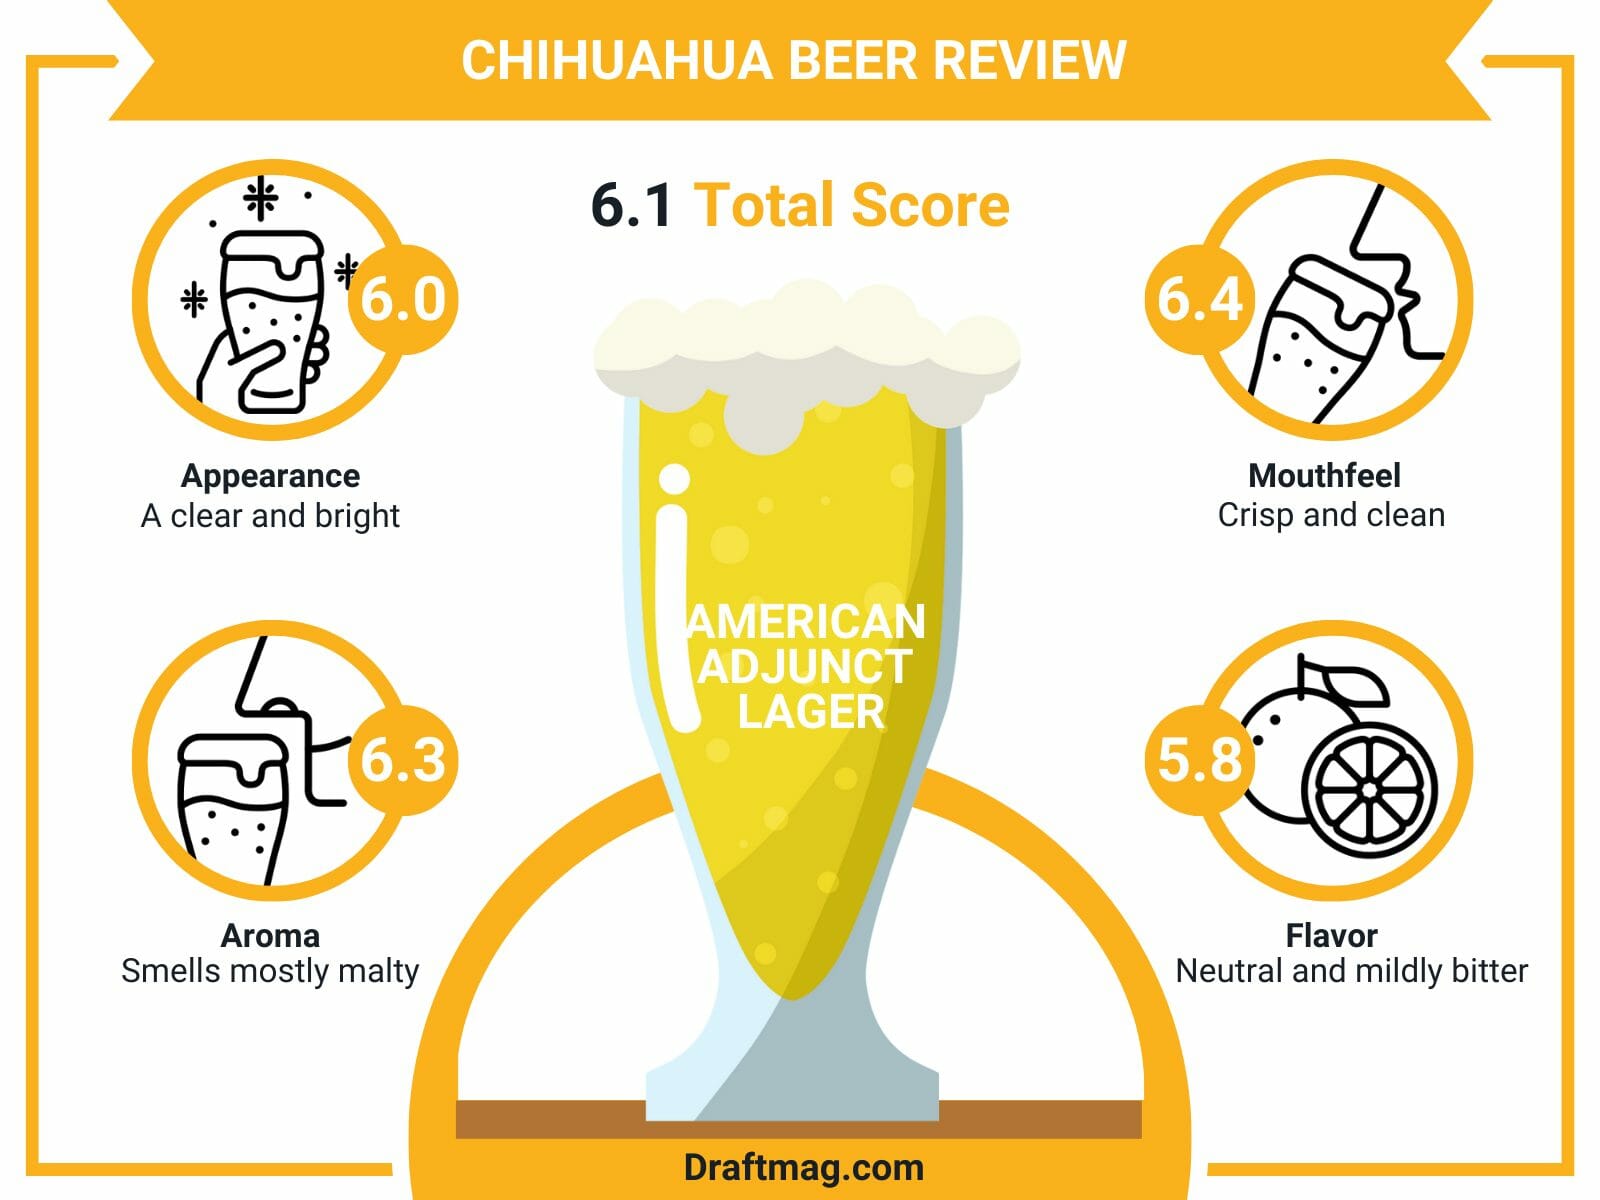 Chihuahua beer review infographic